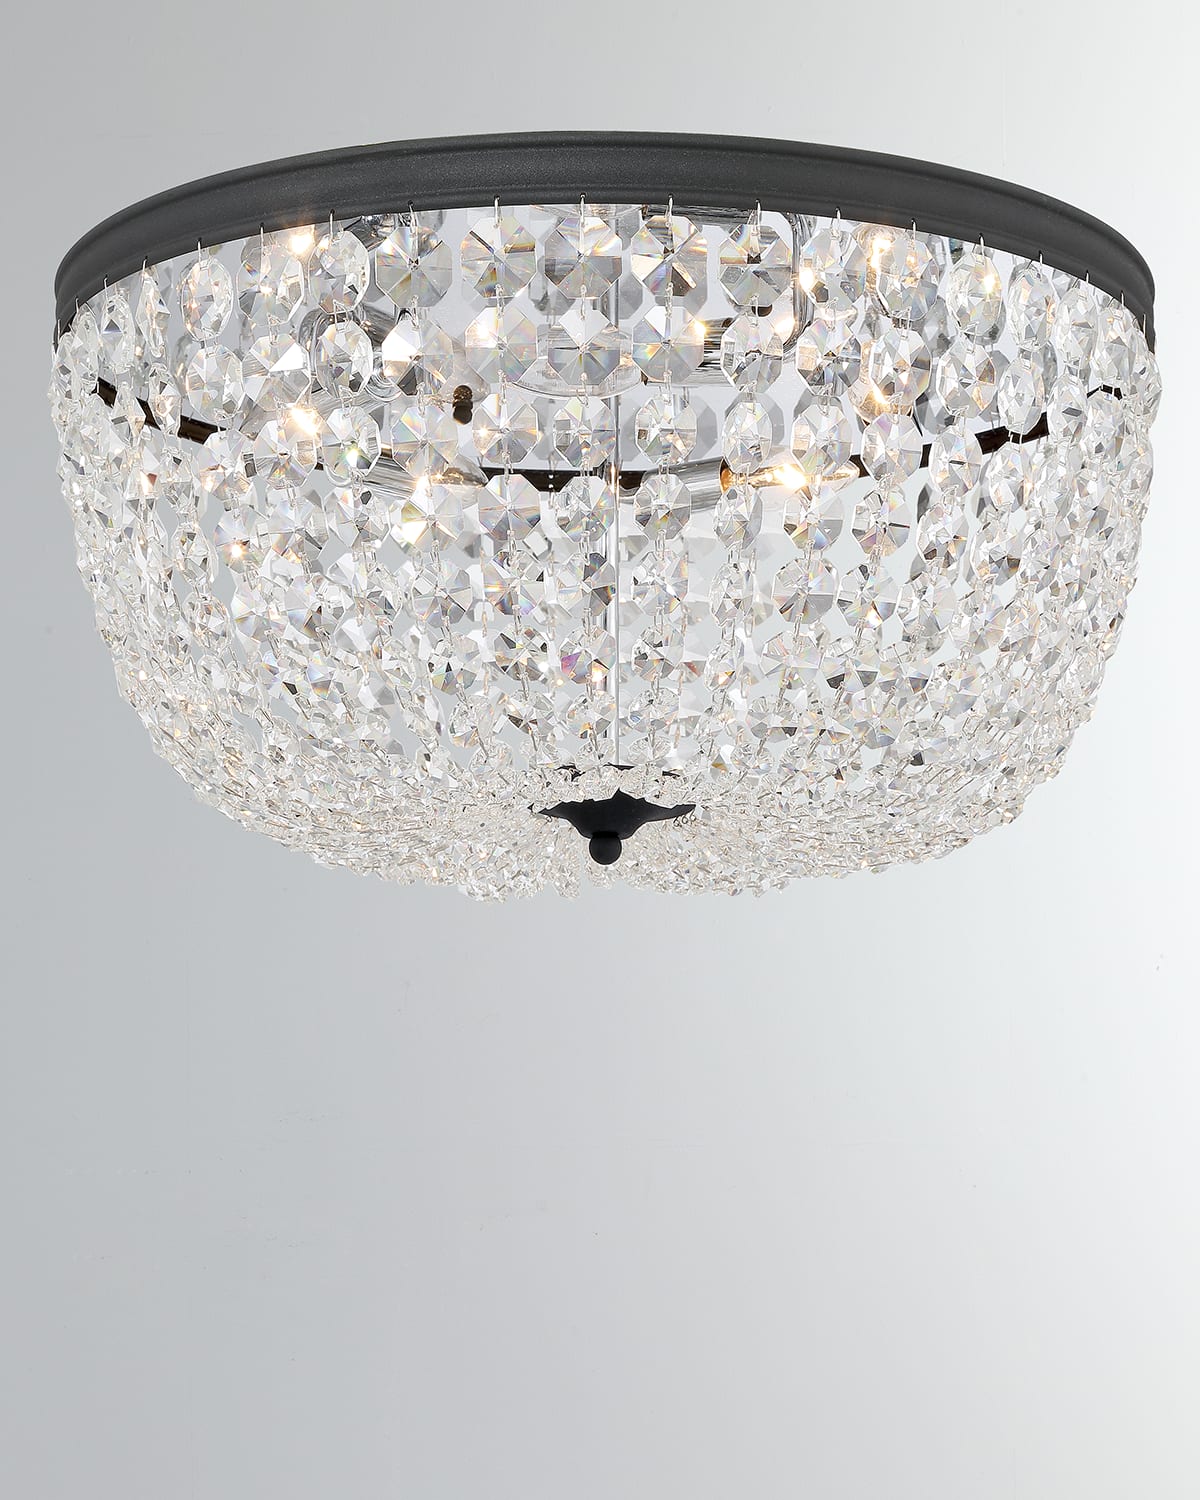 CRYSTORAMA NOLA 5-LIGHT FORGED CEILING MOUNT